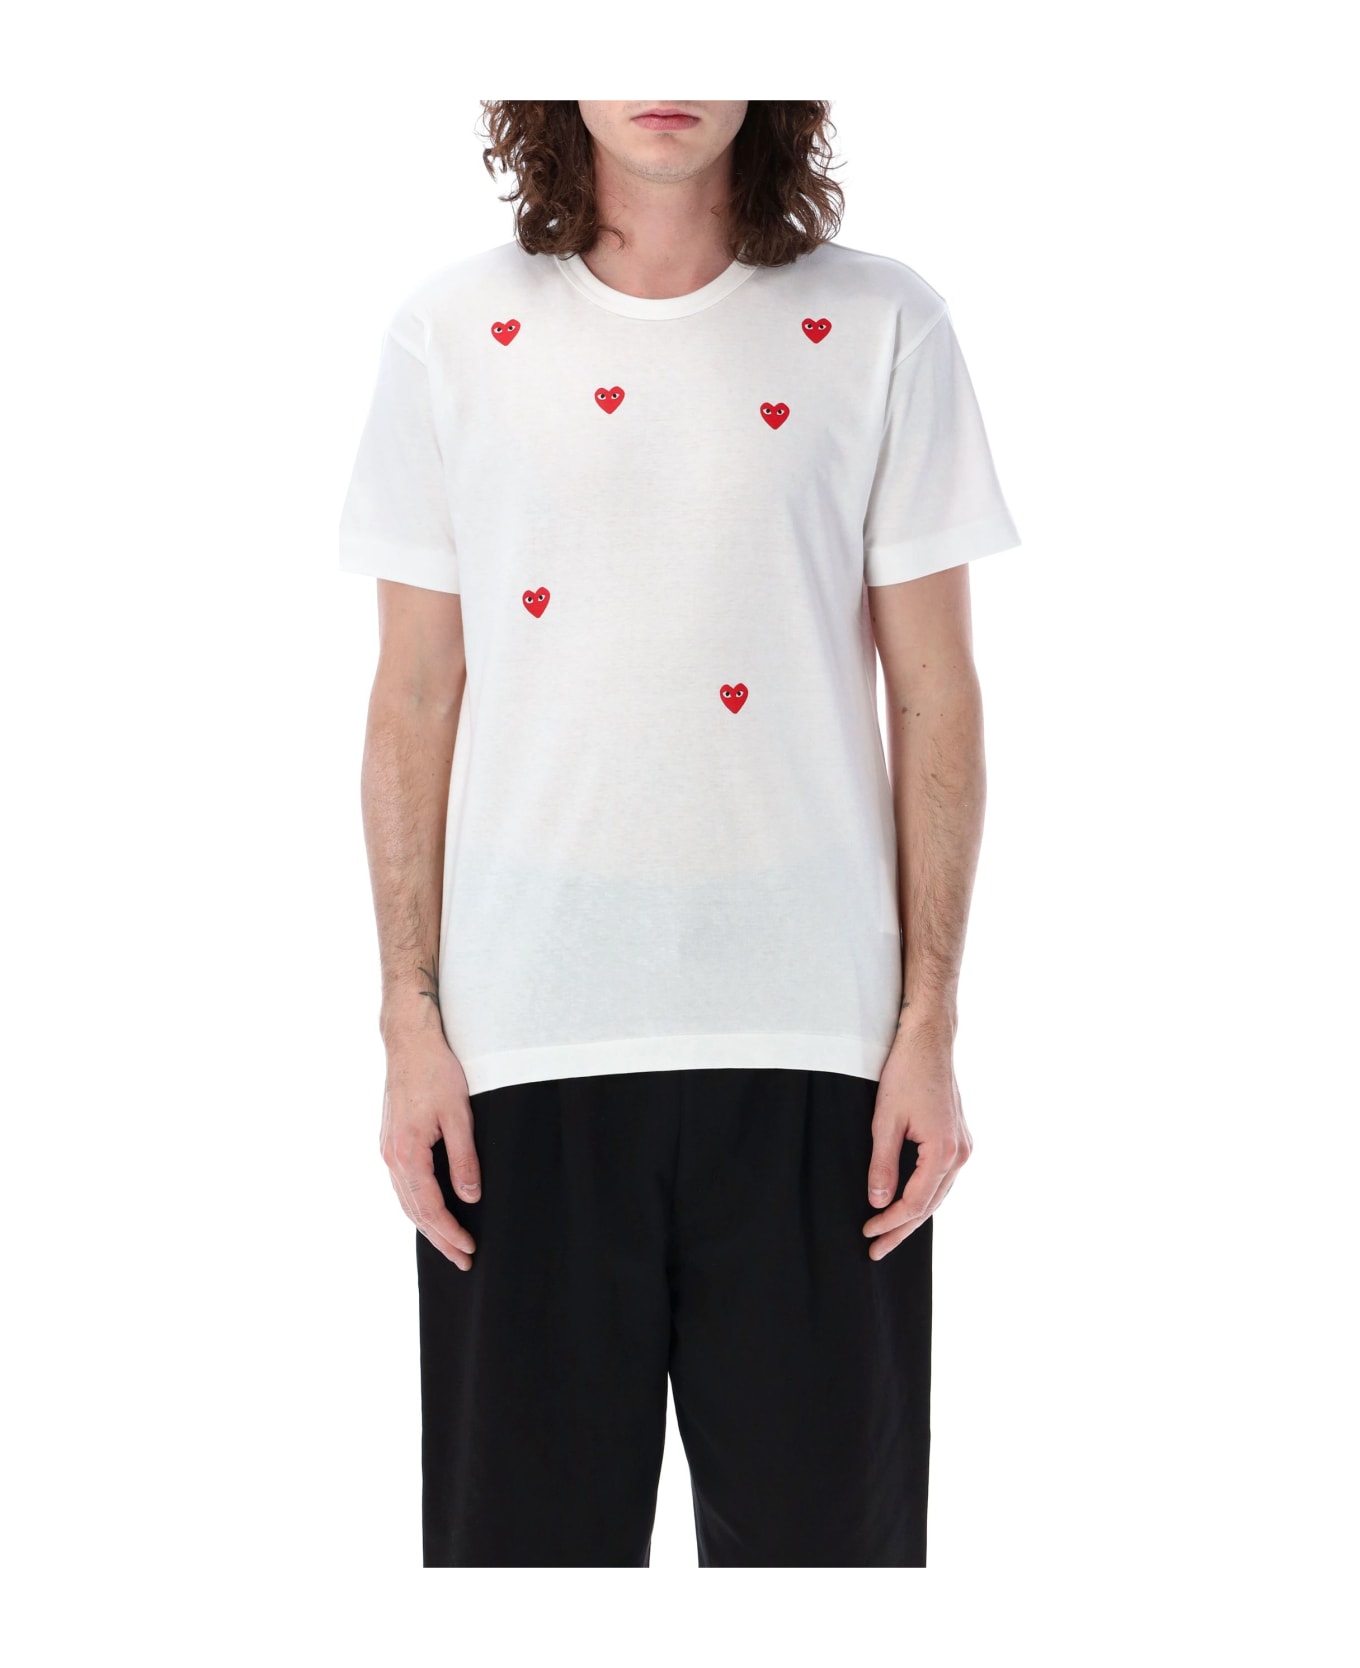 Comme des Garçons Play Red Hearts T-shirt - WHITE Tシャツ